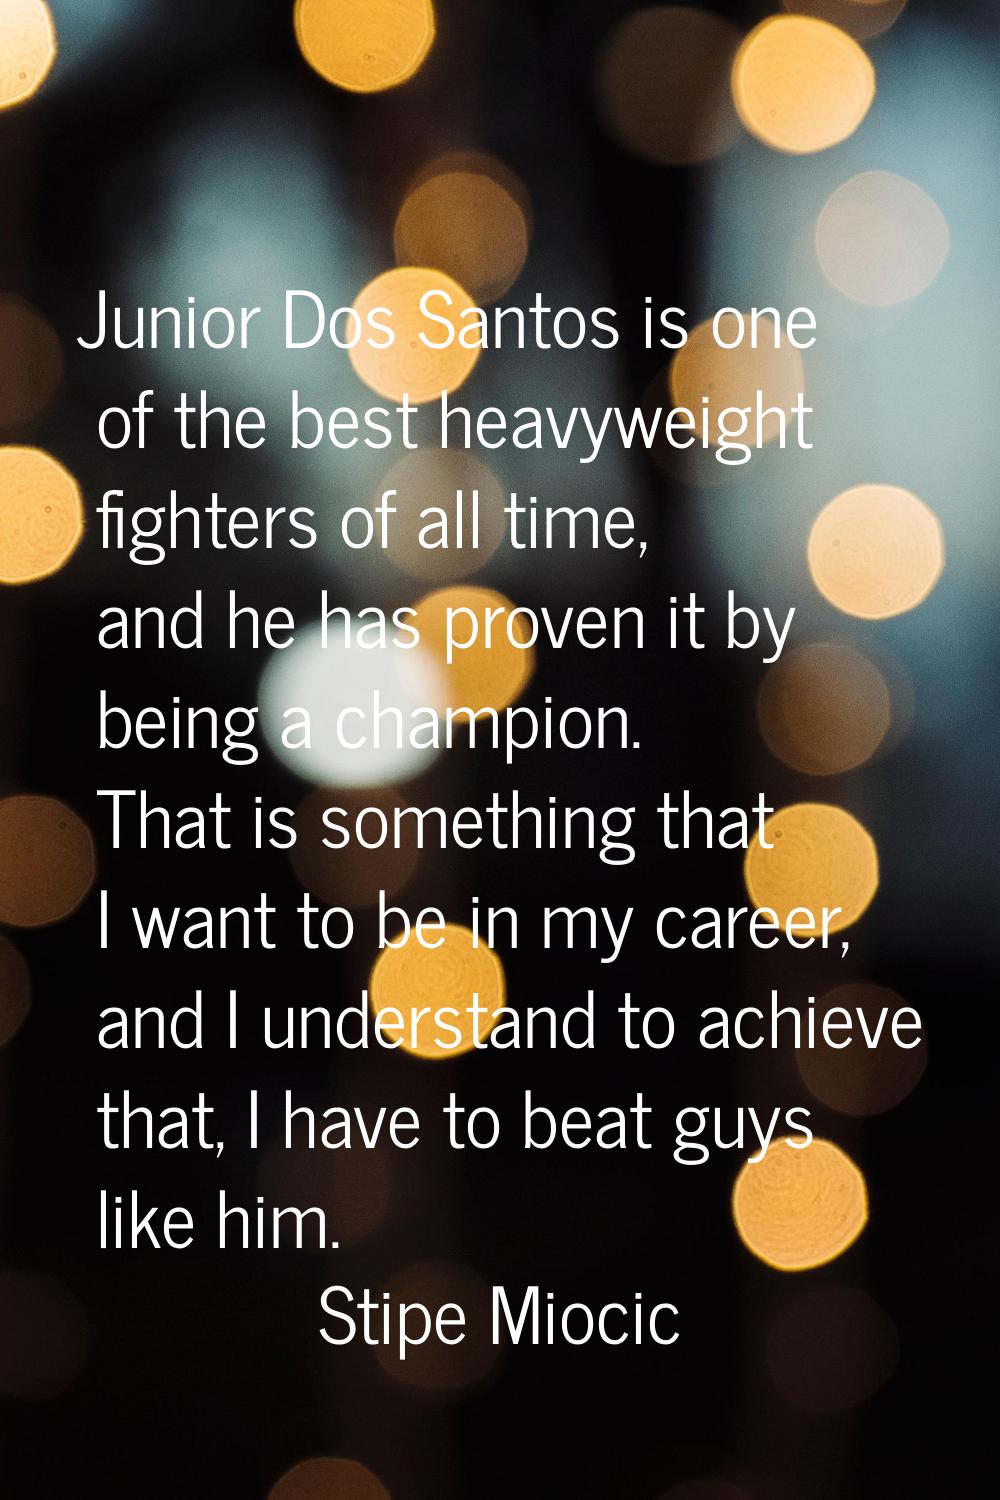 Junior Dos Santos is one of the best heavyweight fighters of all time, and he has proven it by bein